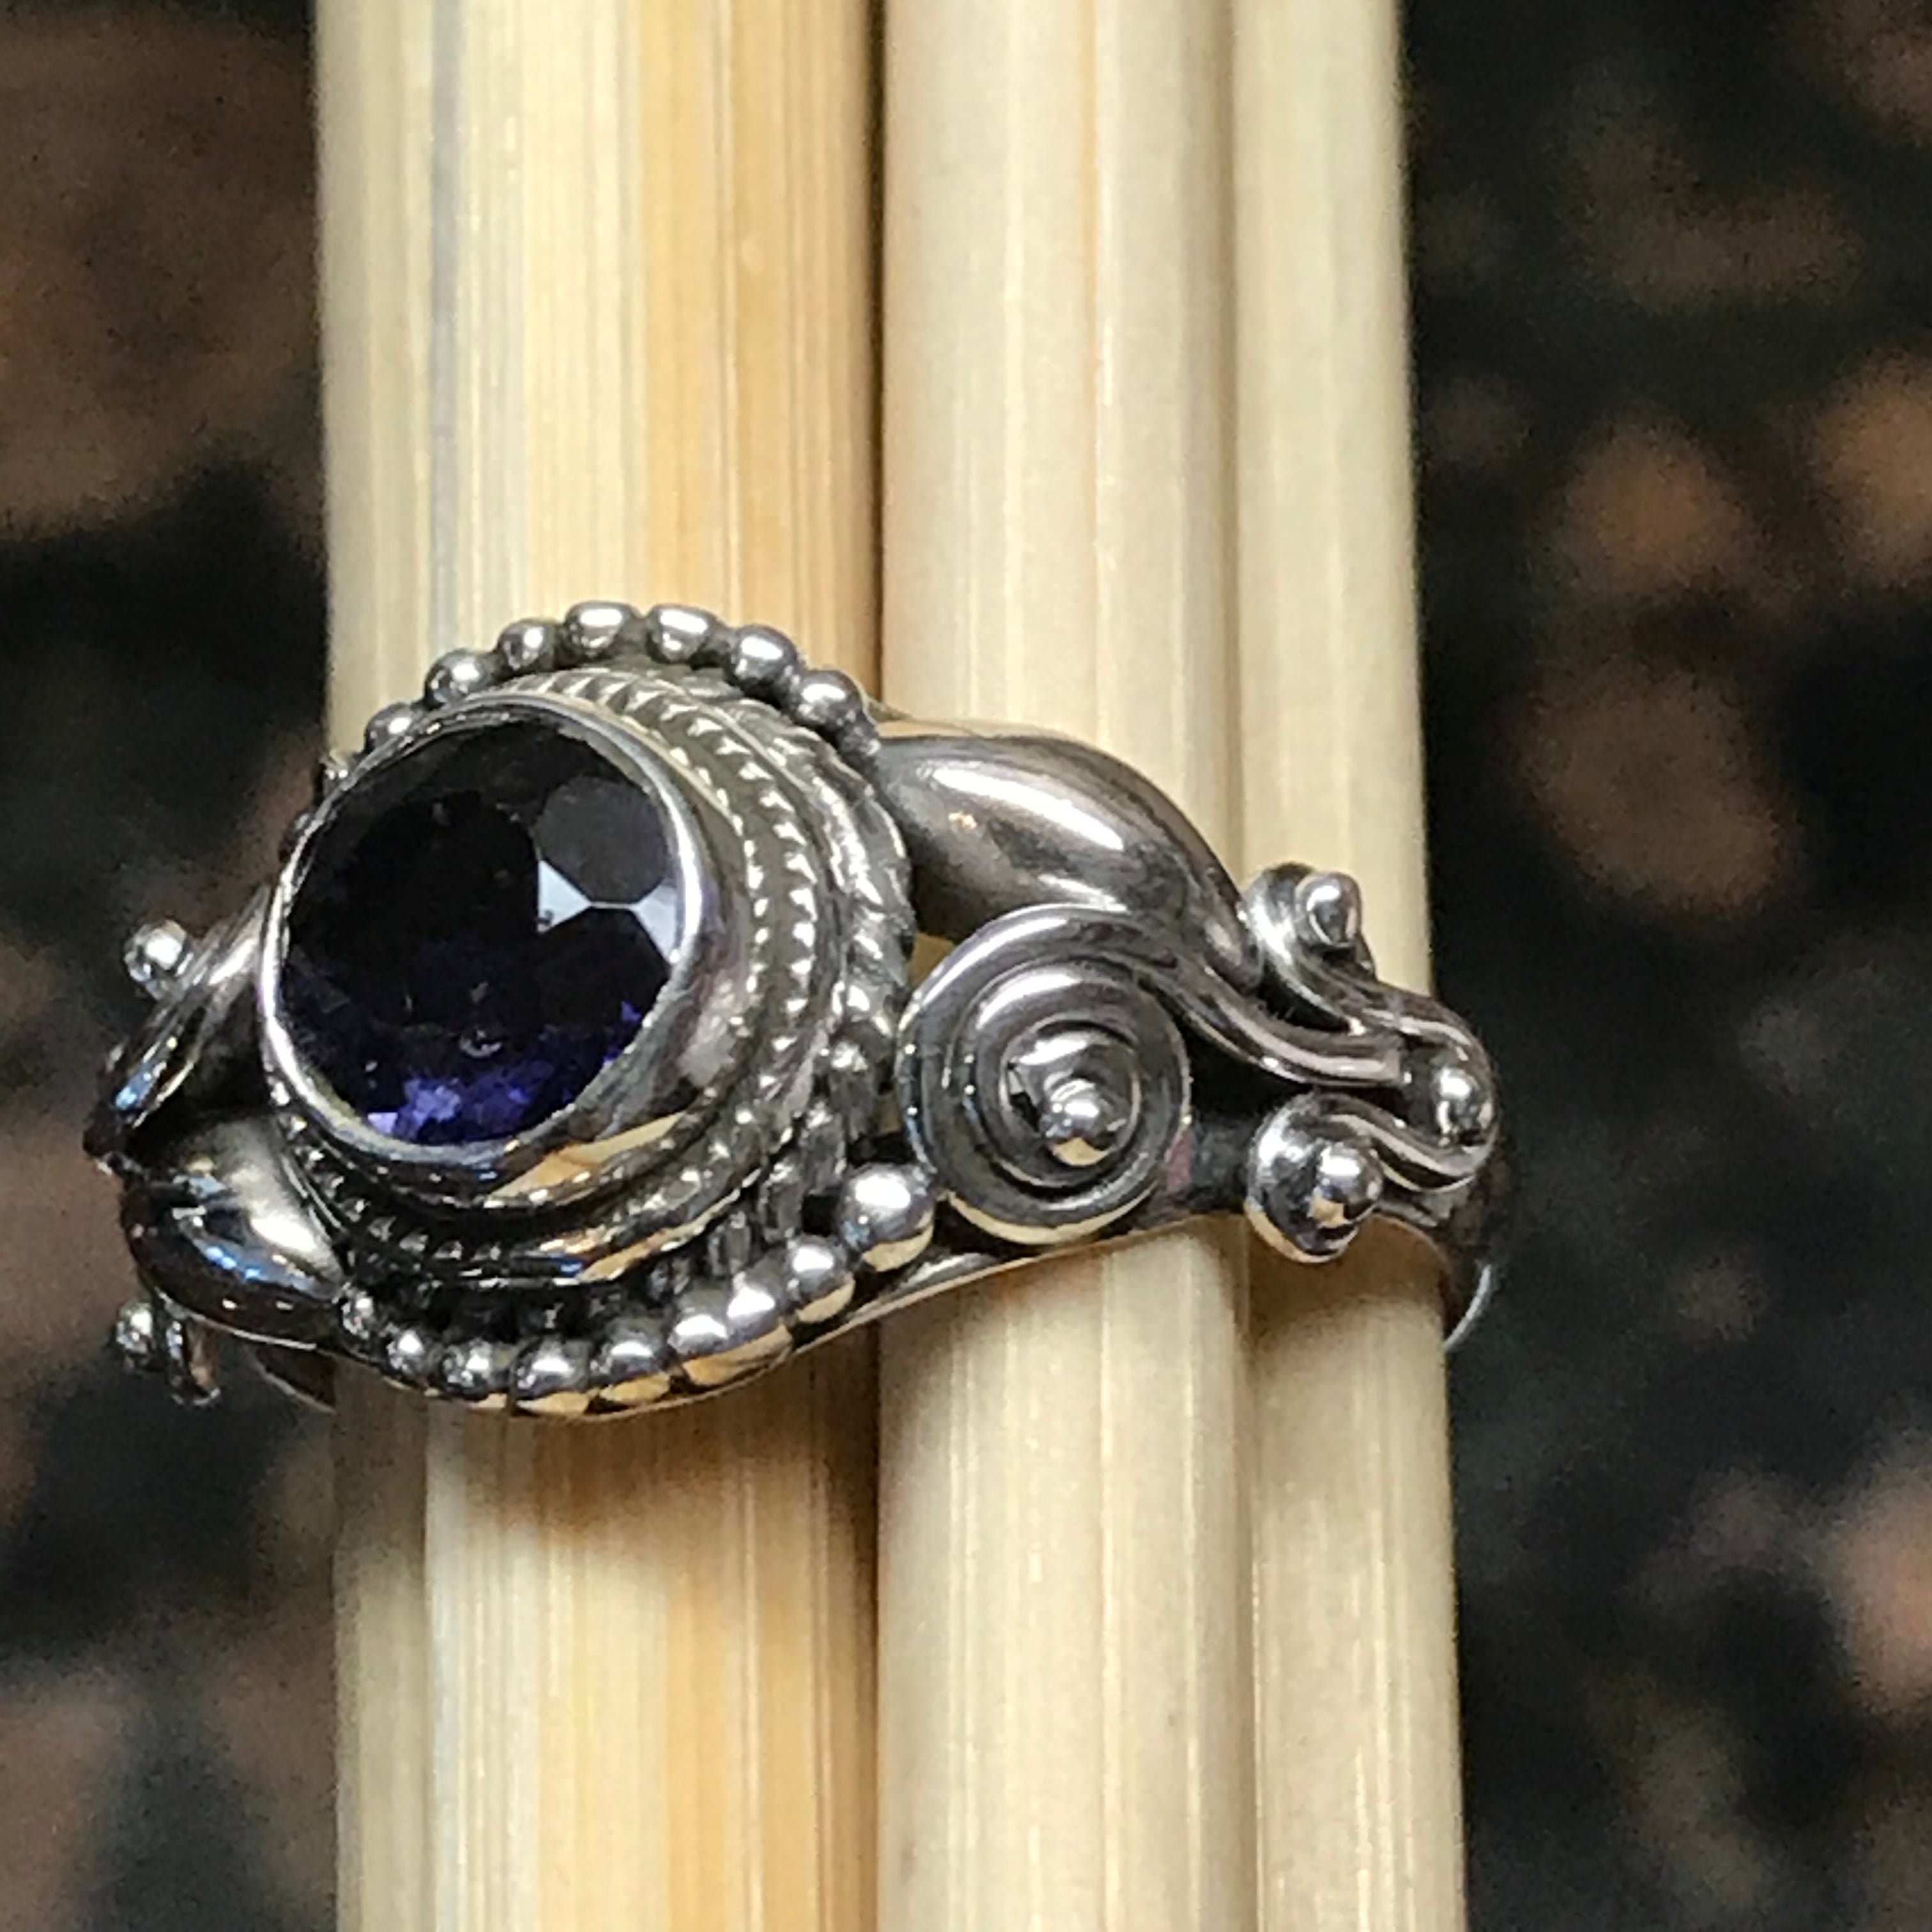 Genuine 1ct Iolite 925 Solid Sterling Silver Engagement Ring Size 6.25, 6.75, 7.75, 9.5 - Natural Rocks by Kala